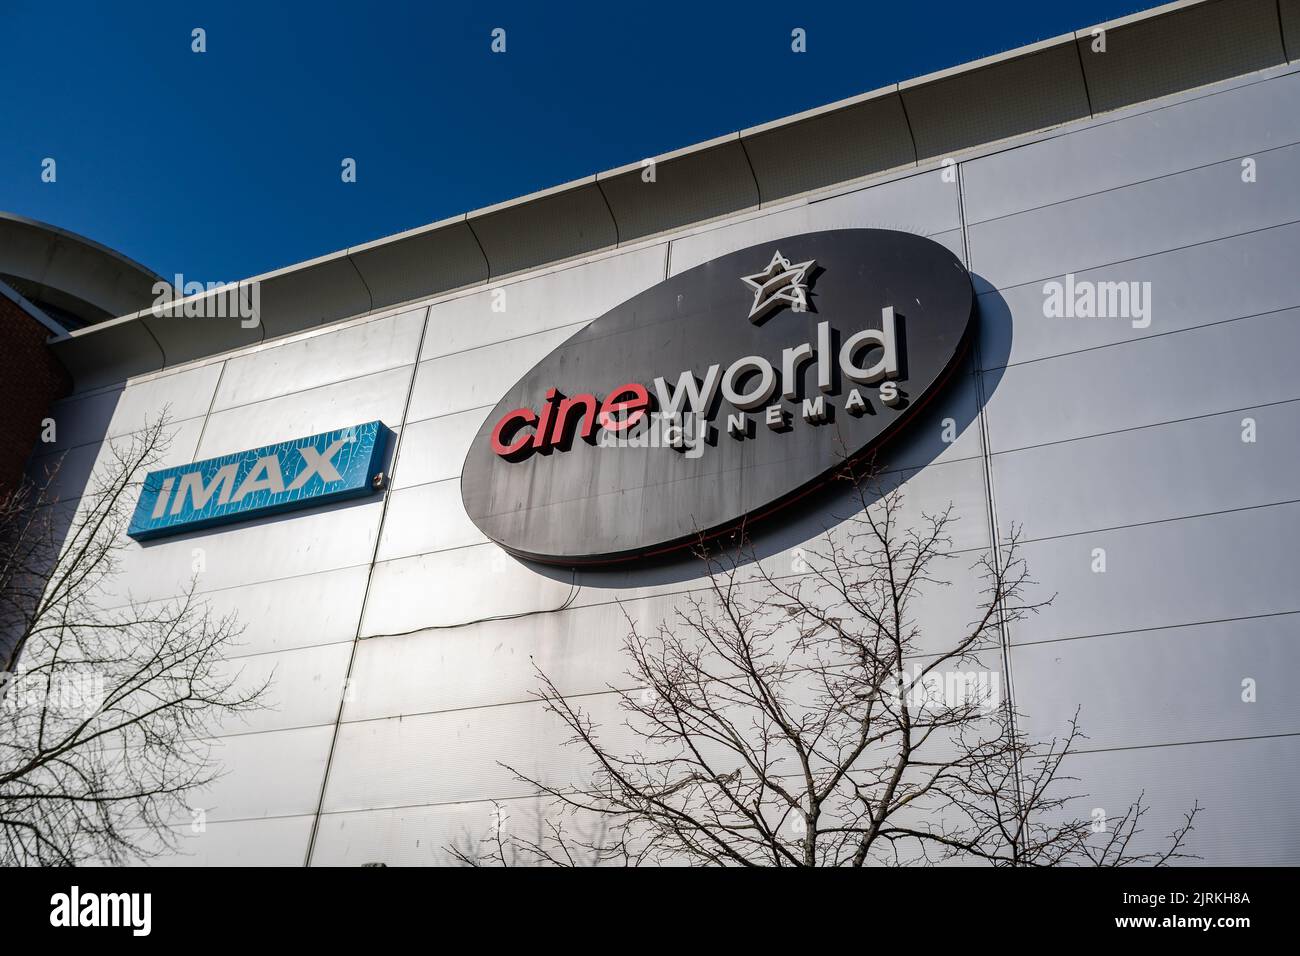 Ipswich Suffolk UK February 25 2022: The popular cinema chain Cineworld. It is the world's second-largest cinema chain and has 790 sites in 10 differe Stock Photo